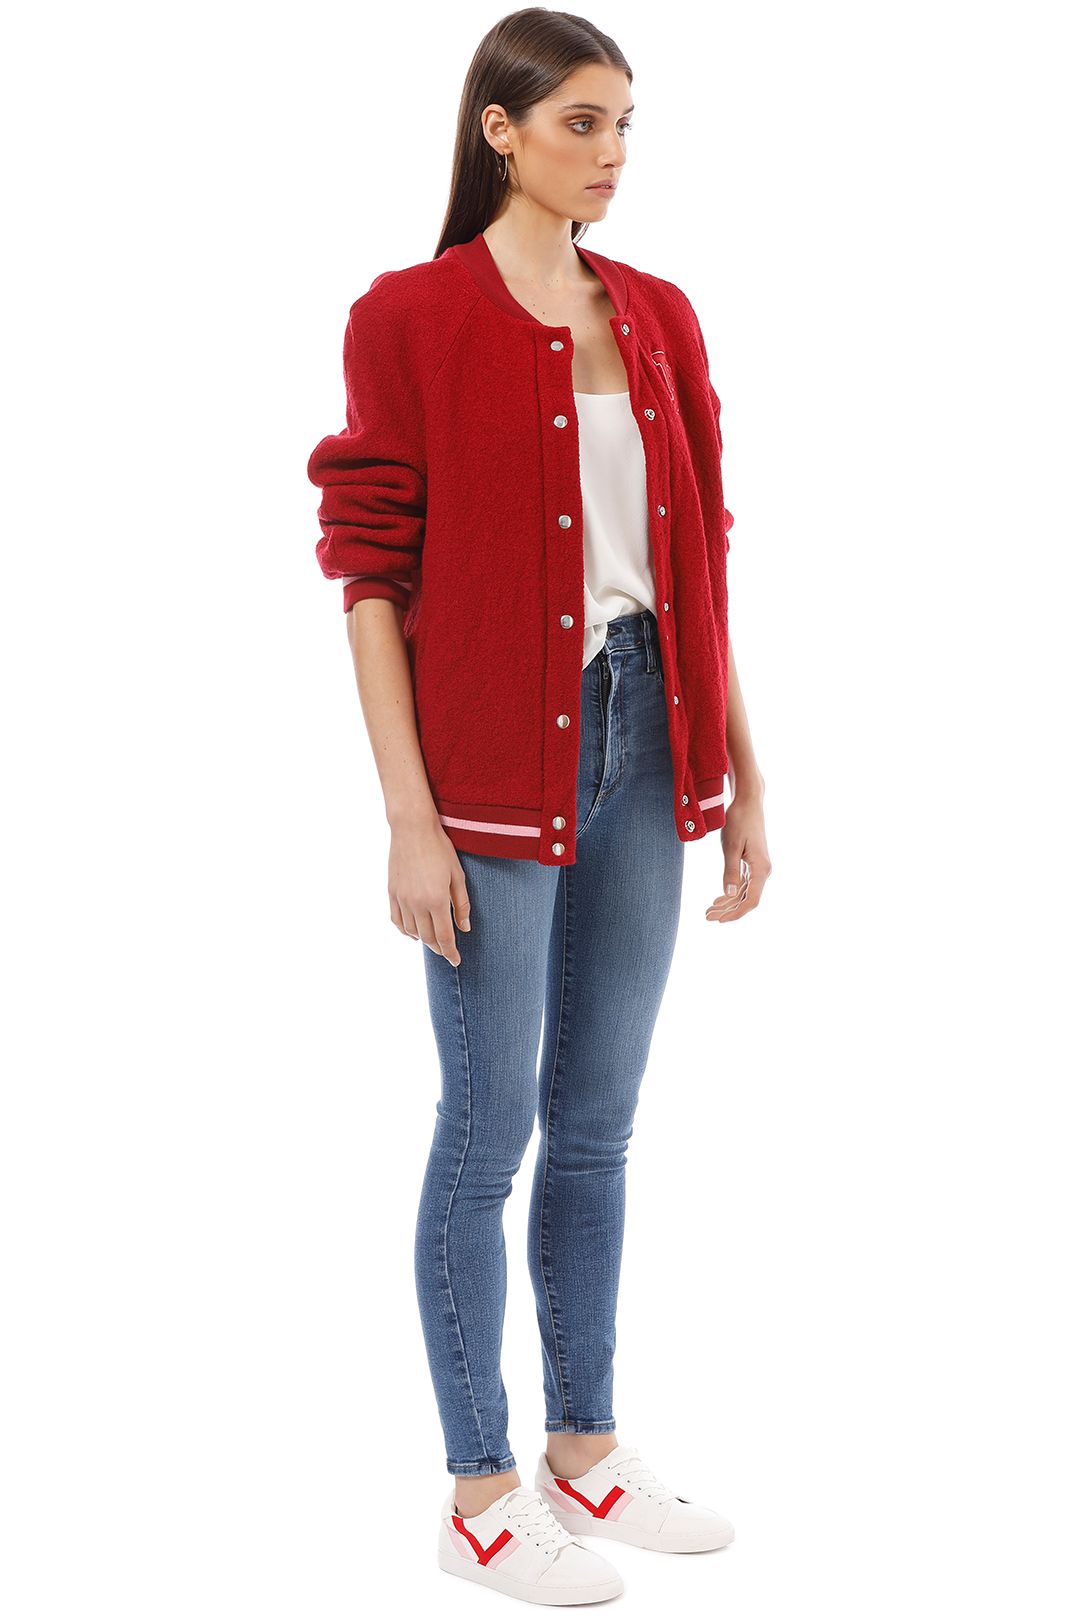 Bec and Bridge - Be Mine Bomber - Red - Side